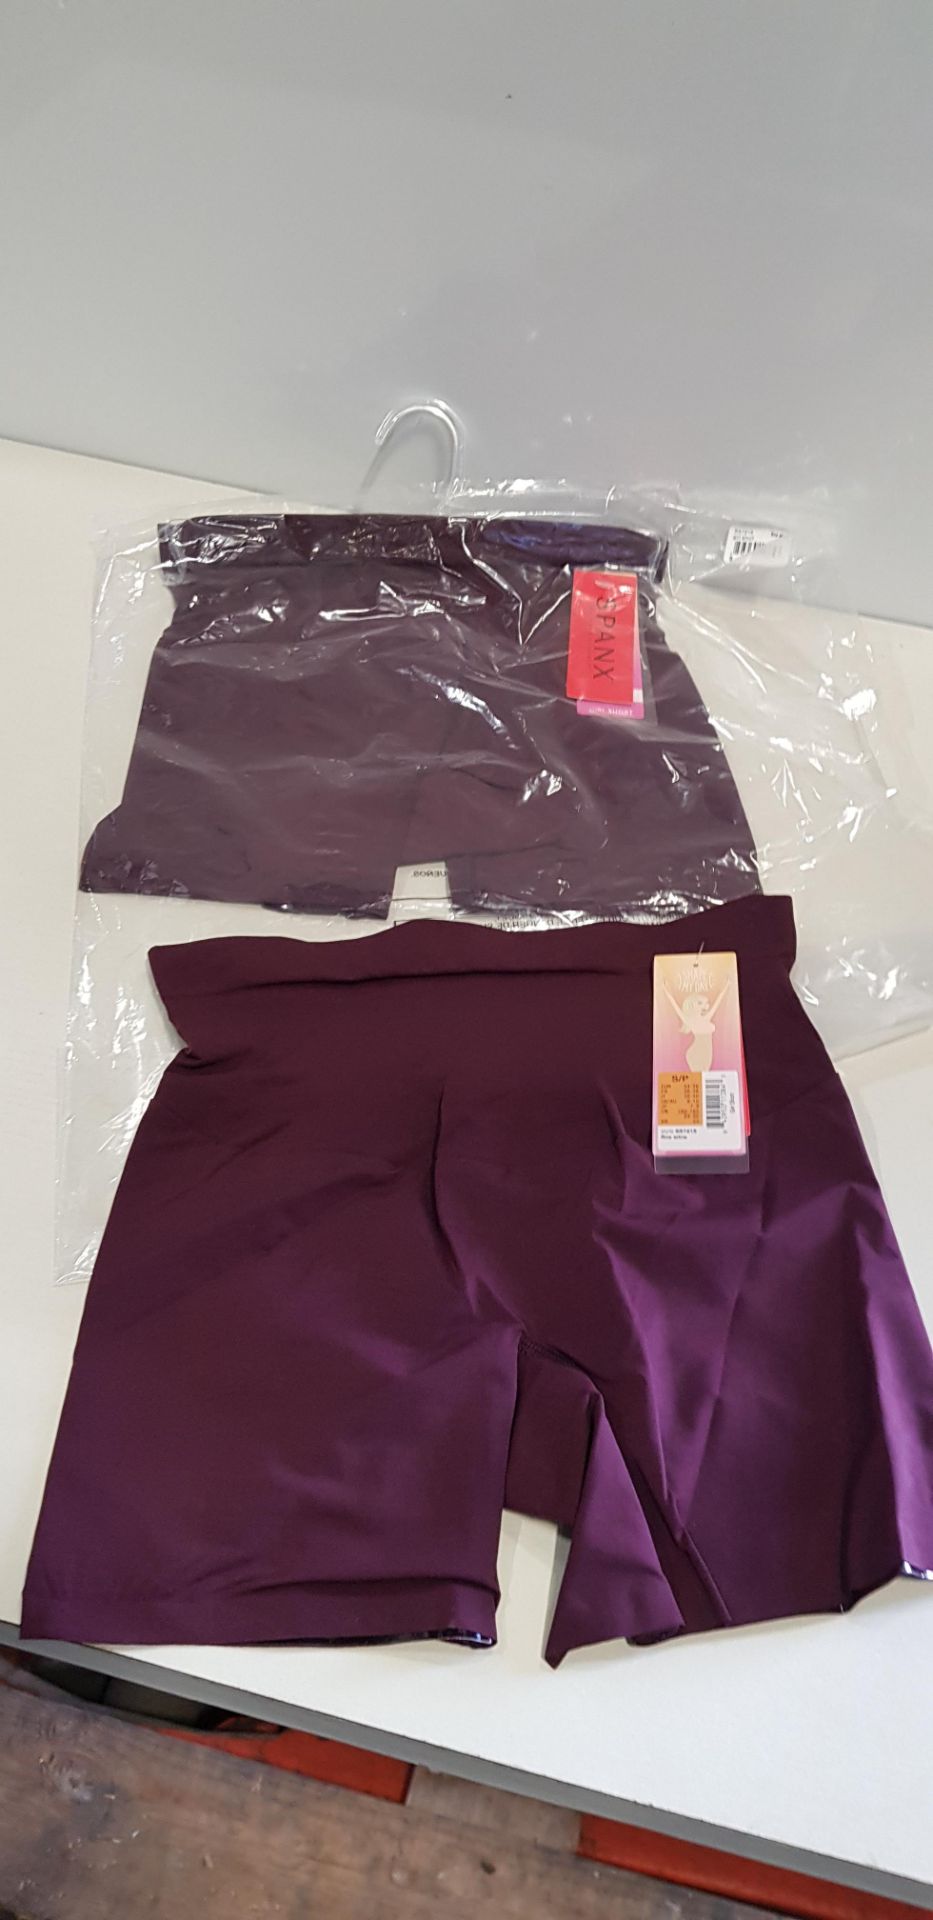 22 X BRAND NEW SPANX FINE WINE COLOURED GIRLS SHAPING SHORTS SIZE SMALL